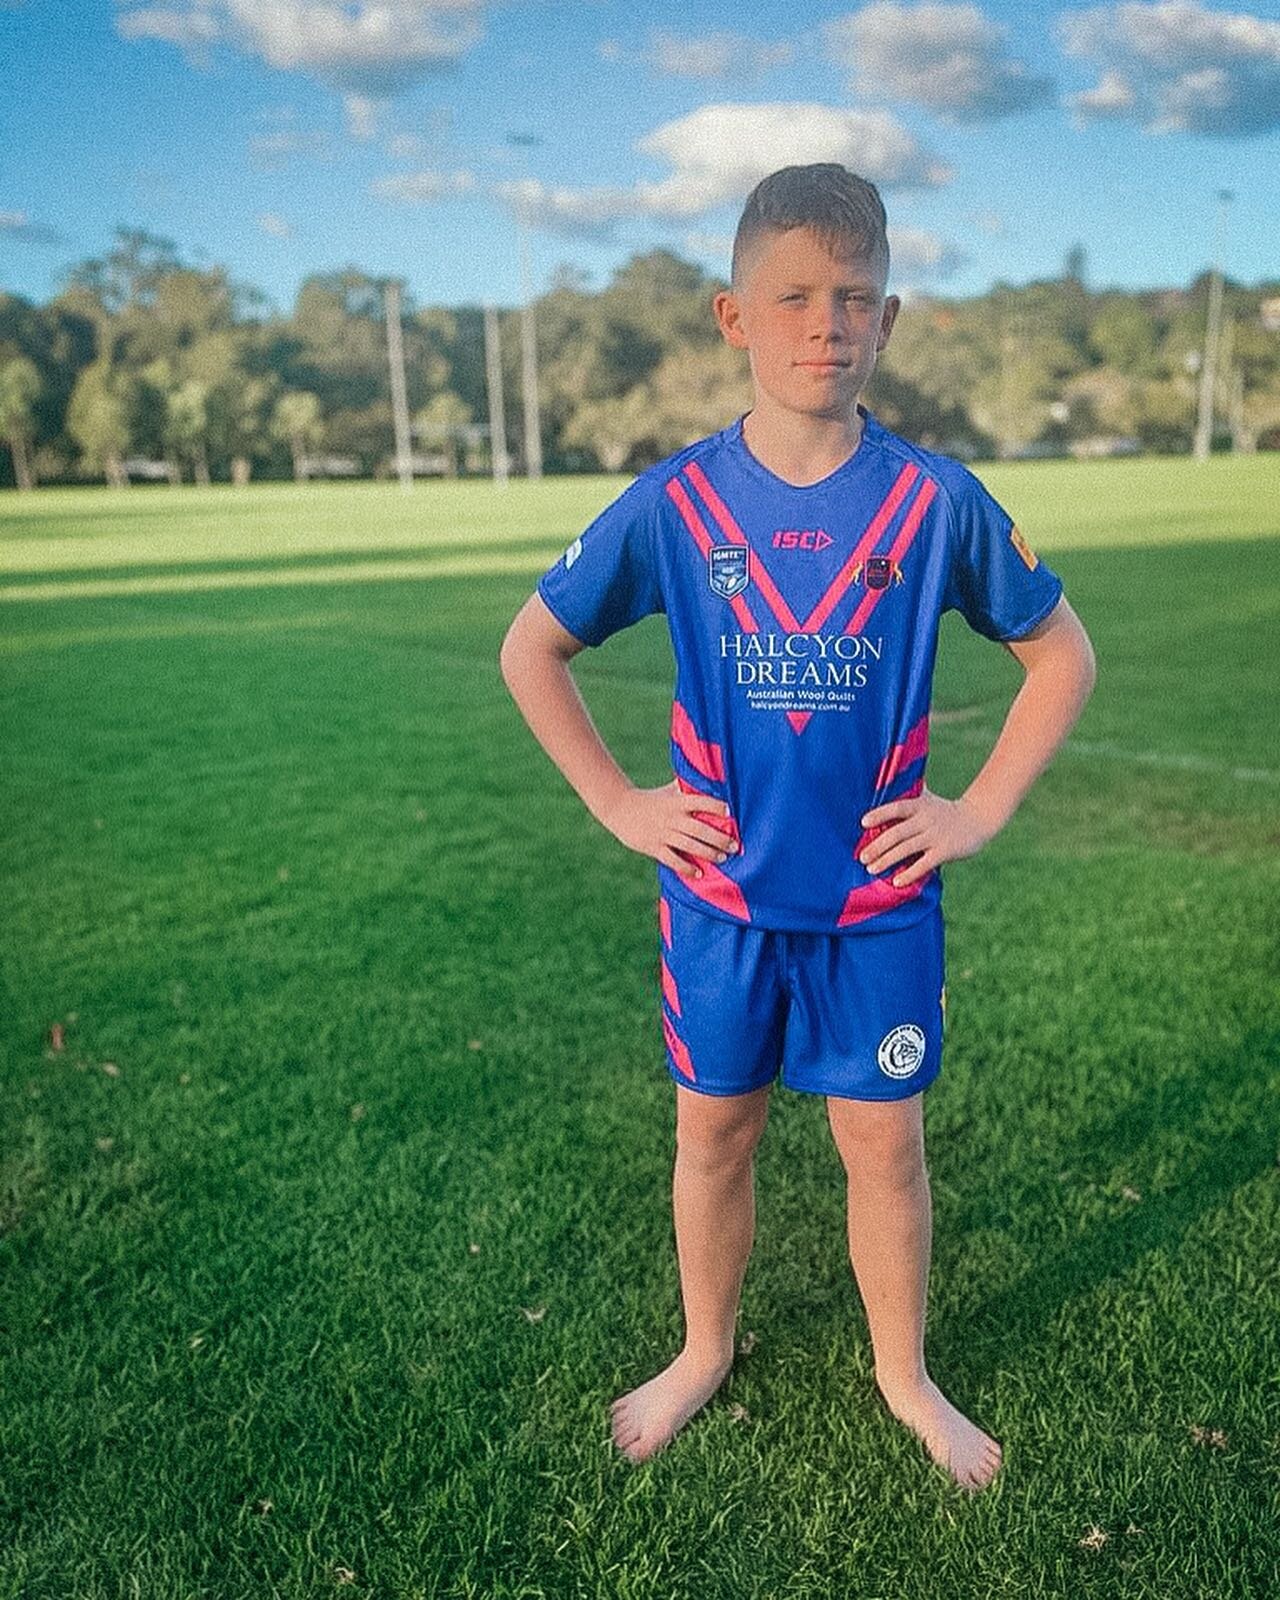 With Round 1 fast approaching we are so excited to launch our brand new GAME DAY player kits for 2023. 👌🏼

We have no doubt the kids will be running on the fields this weekend with smiles from ear to ear, kicking off the new season with an absolute